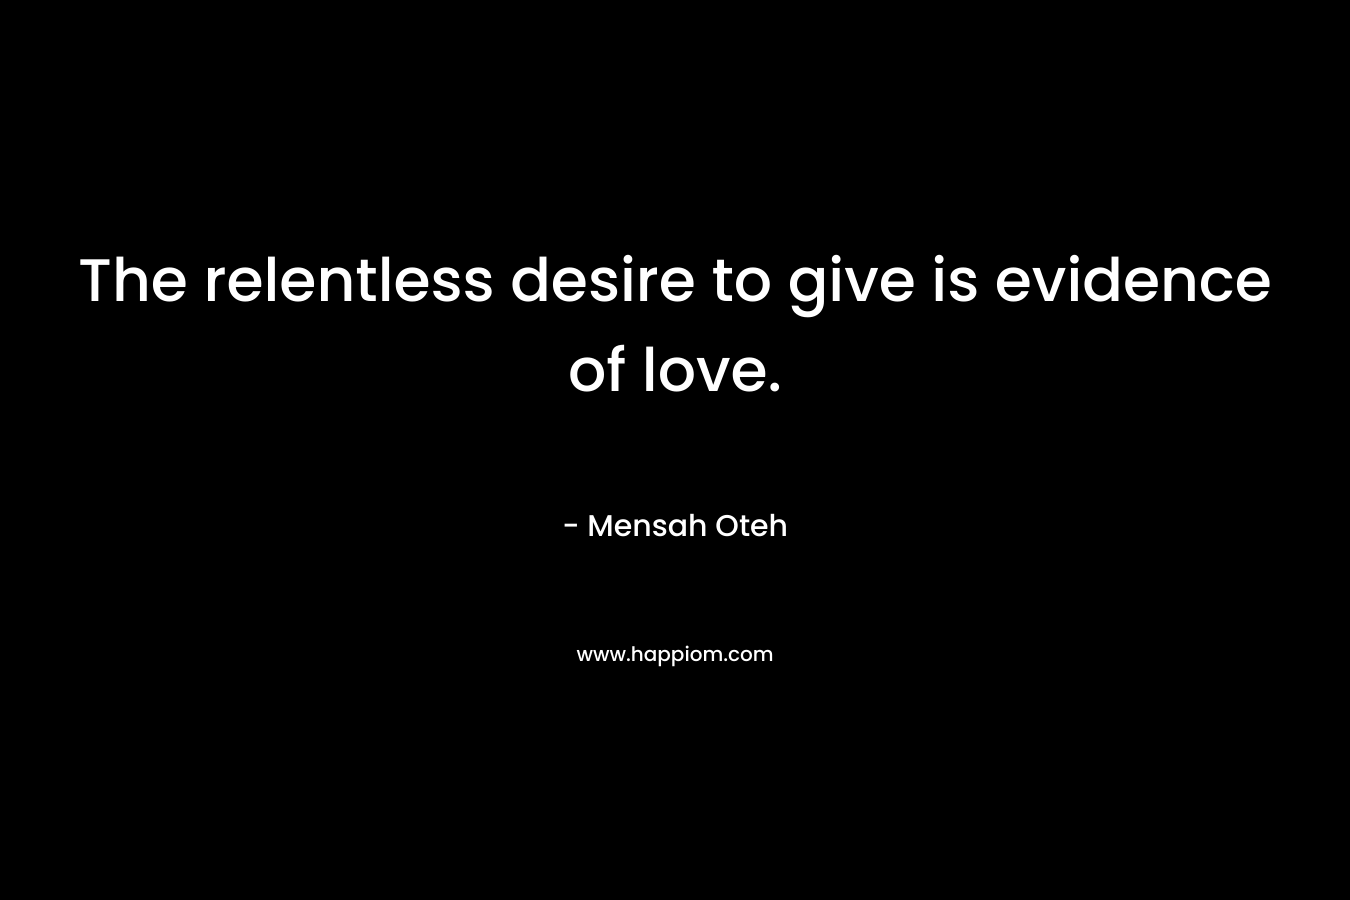 The relentless desire to give is evidence of love.